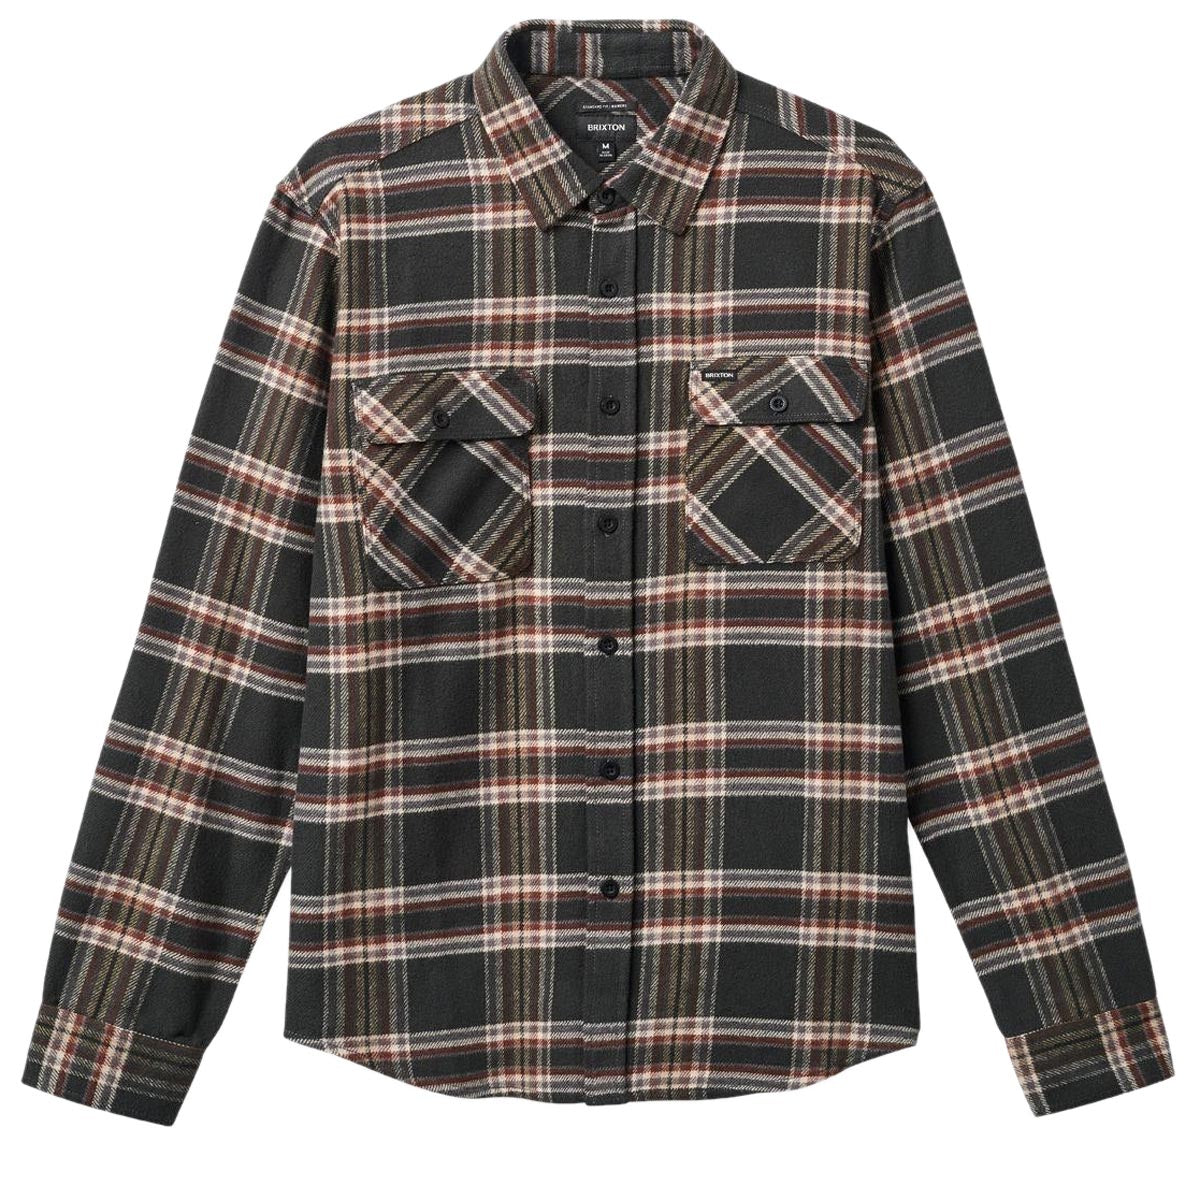 Brixton Bowery Flannel Long Sleeve Shirt - Black/Charcoal/Off White image 3